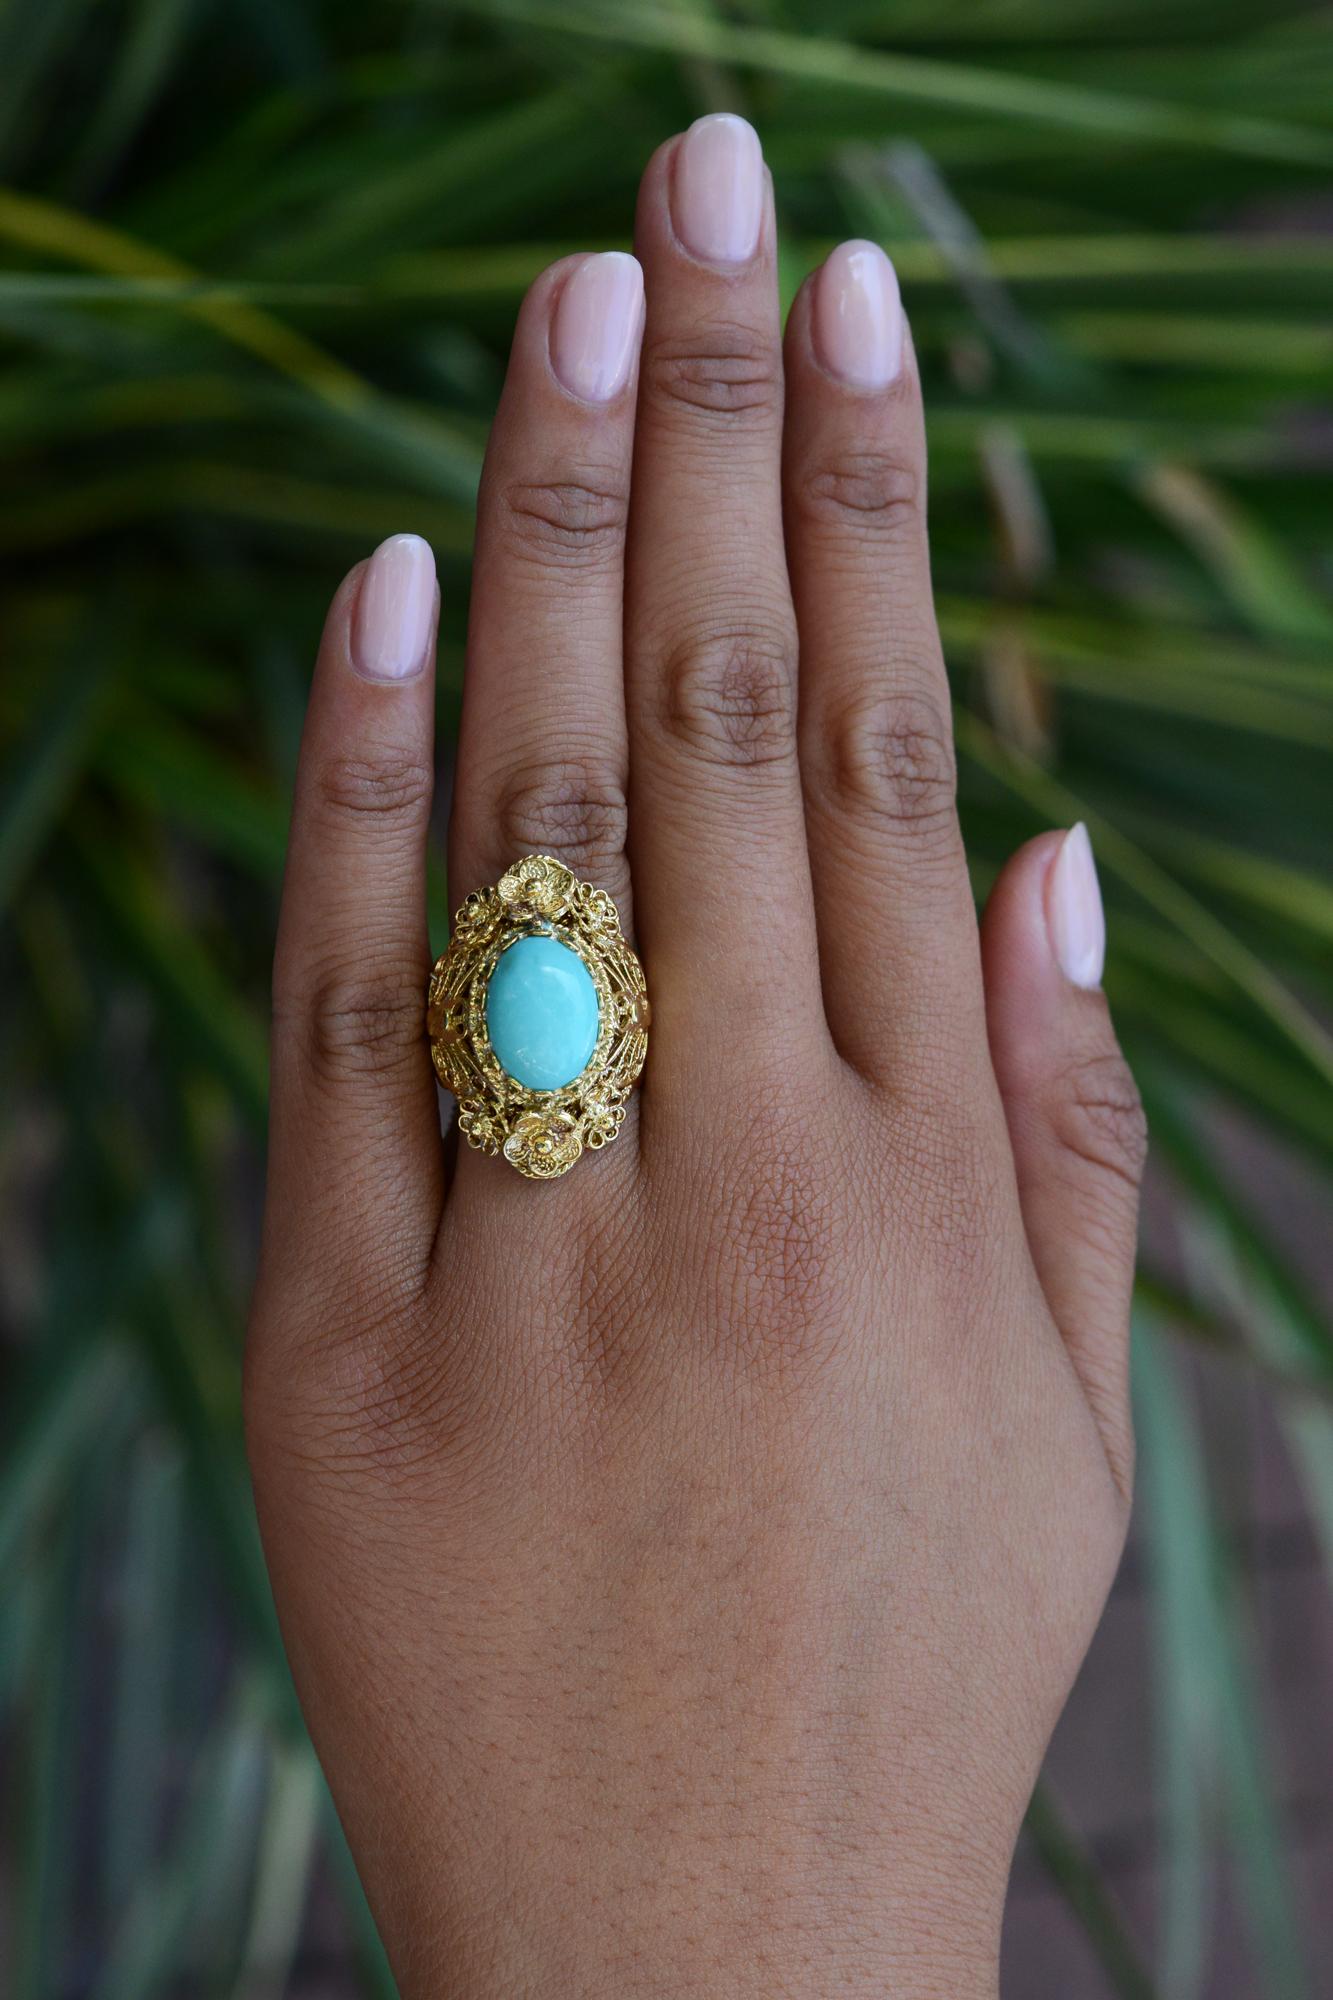 This vintage cocktail ring exhibits extensive craftsmanship and a luxurious, opulent, Persian turquoise showcased in the center. The rich 14k yellow gold portrays incredibly ornate floral motifs throughout the entirety of the ring. Featuring a